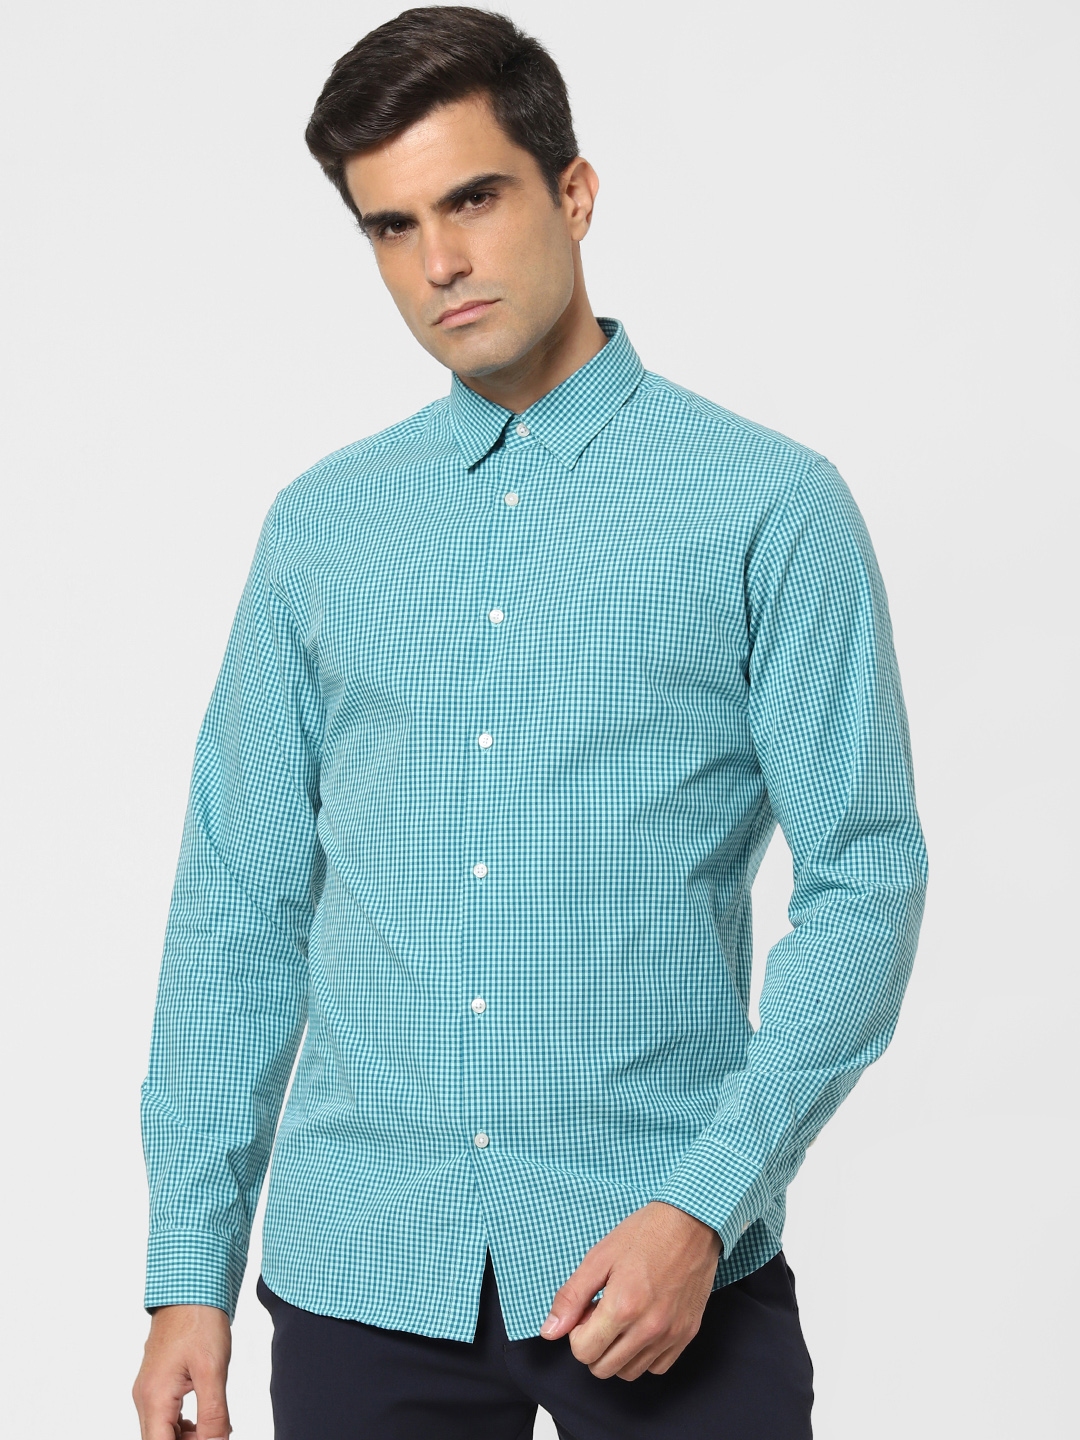 Buy SELECTED Men Turquoise Blue Slim Fit Checked Casual Shirt - Shirts ...